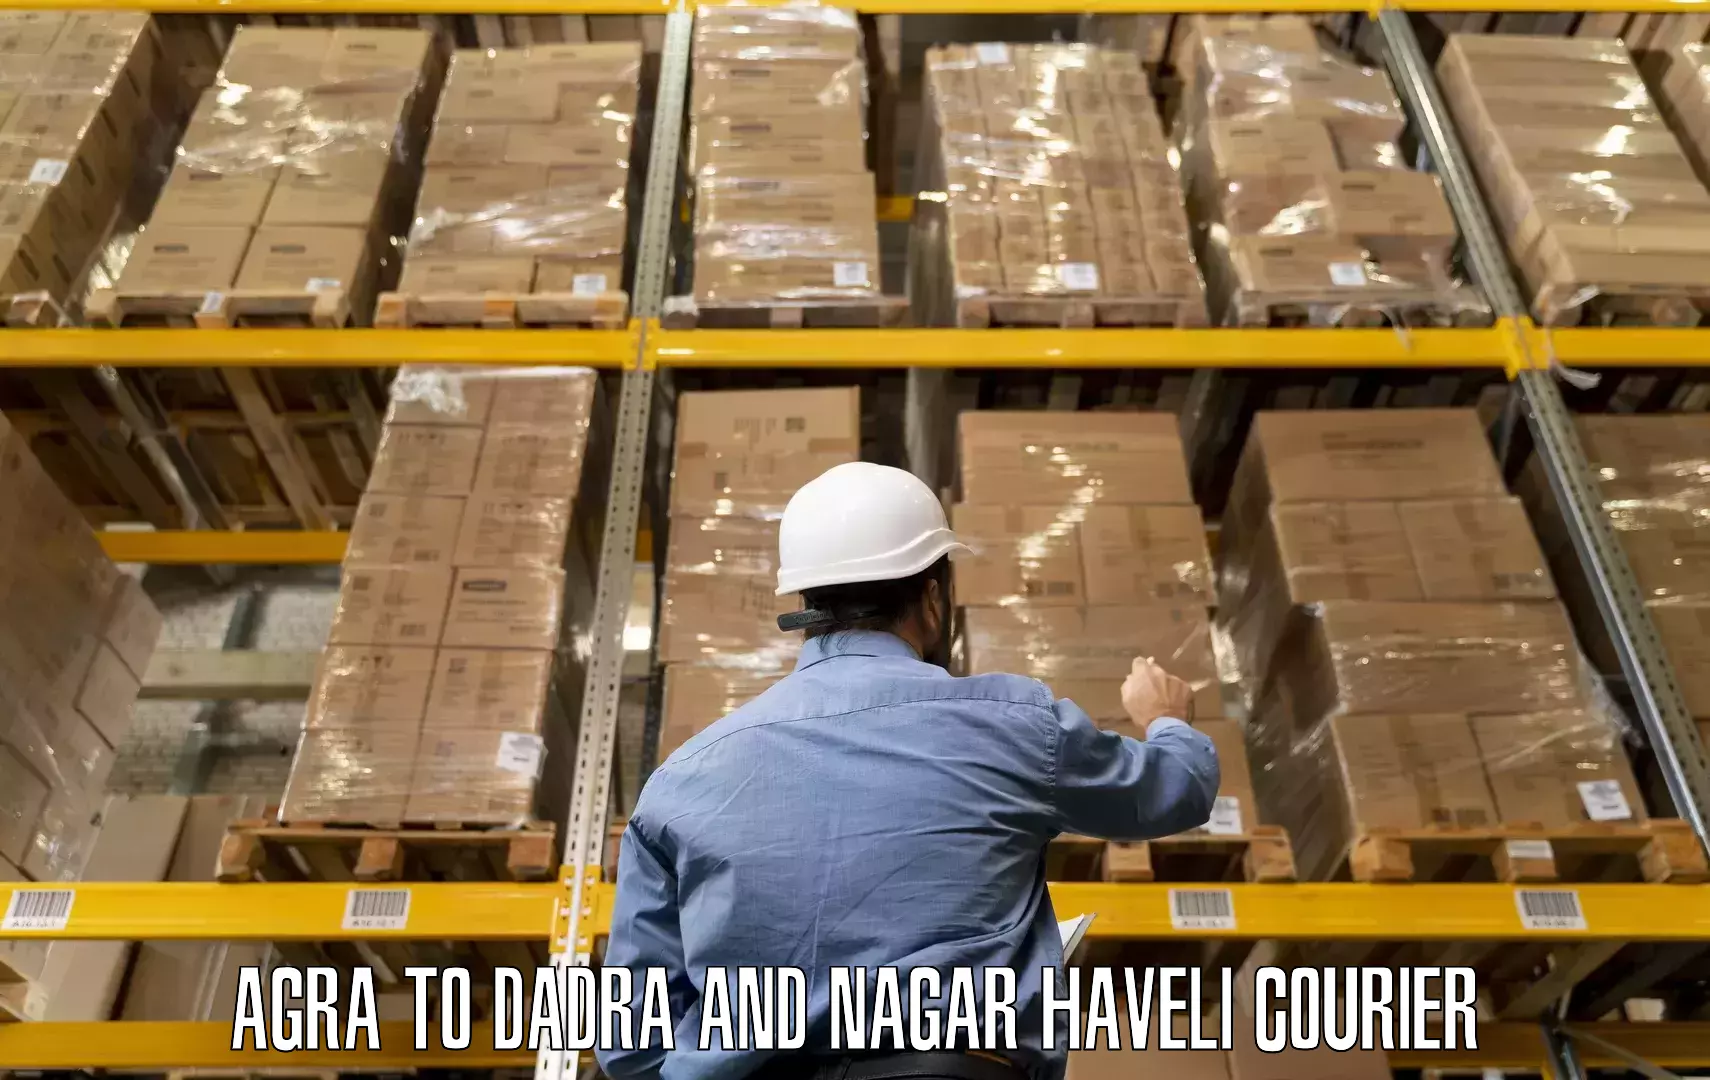 Trusted moving company Agra to Dadra and Nagar Haveli